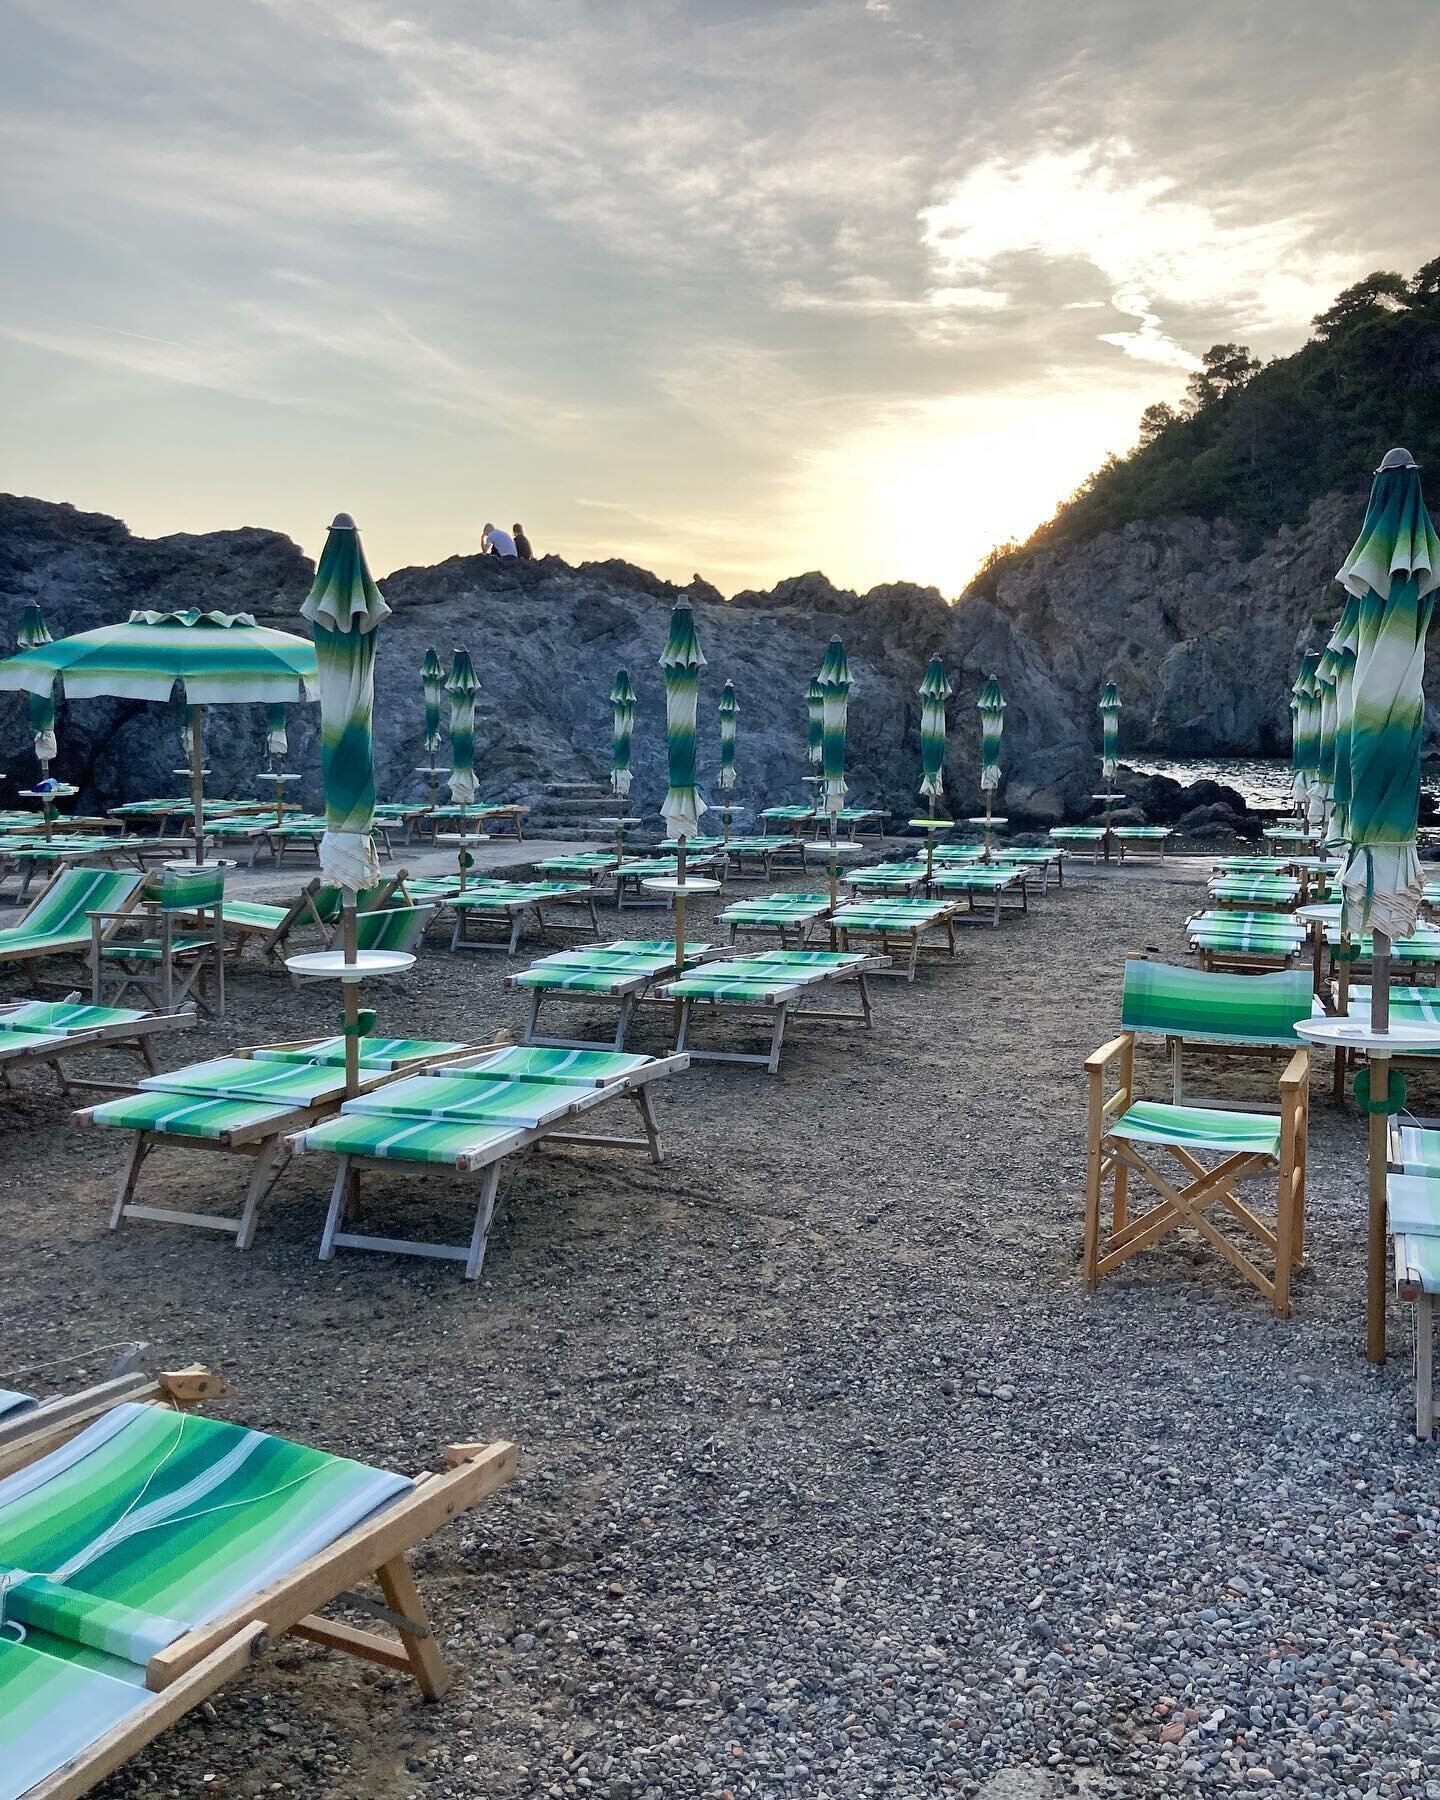 An ode to the bagno ⛱️, the seaside lido concept lining most of Italy&rsquo;s coastlines, classic beach clubs with color coordinated deck chairs and parasols, offering respite, shade and cold showers on a hot day, usually along with an espresso bar, 